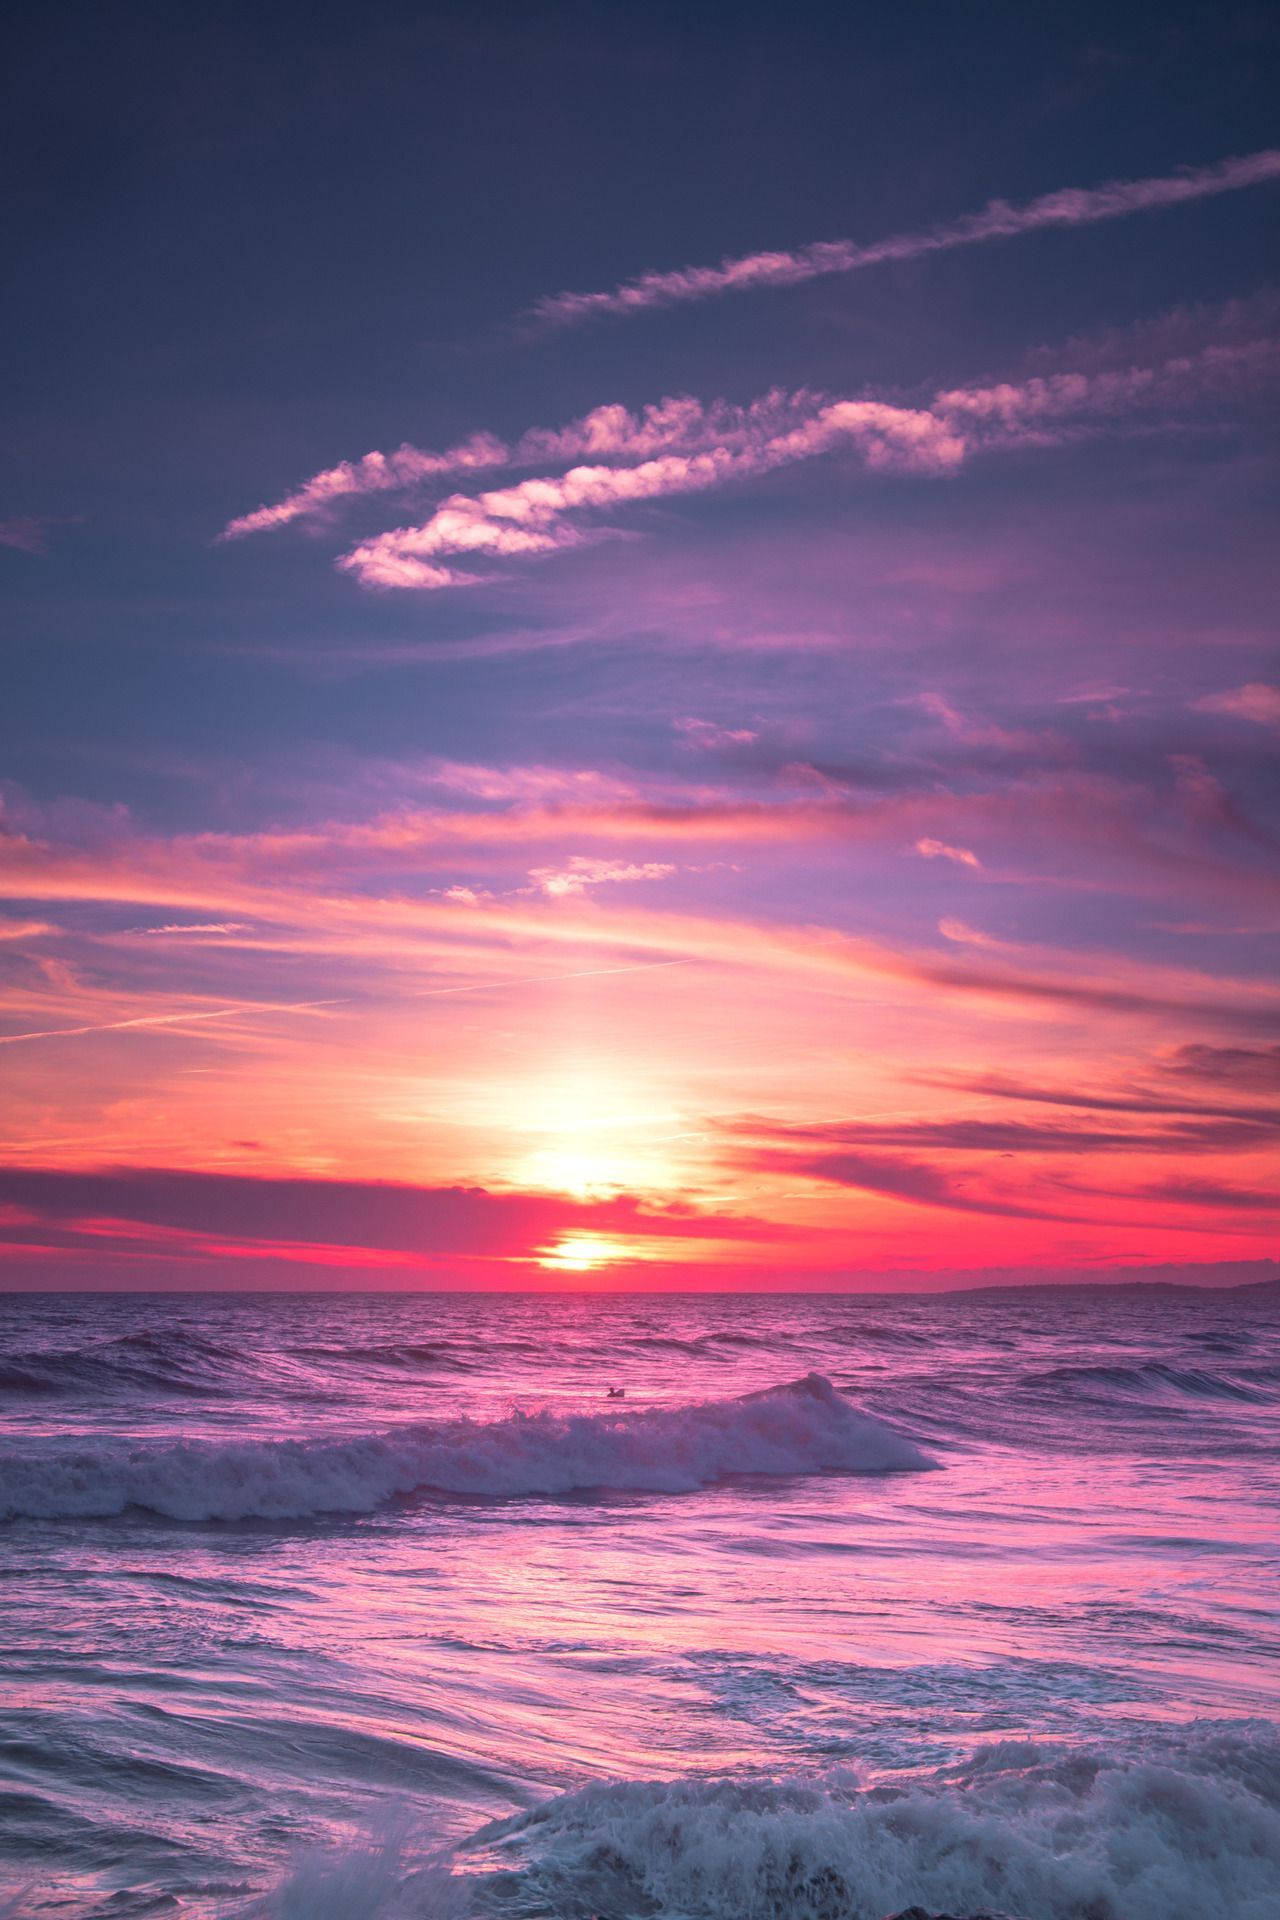 A beautiful sunset over the ocean with pink and purple hues - Sunrise, Florida